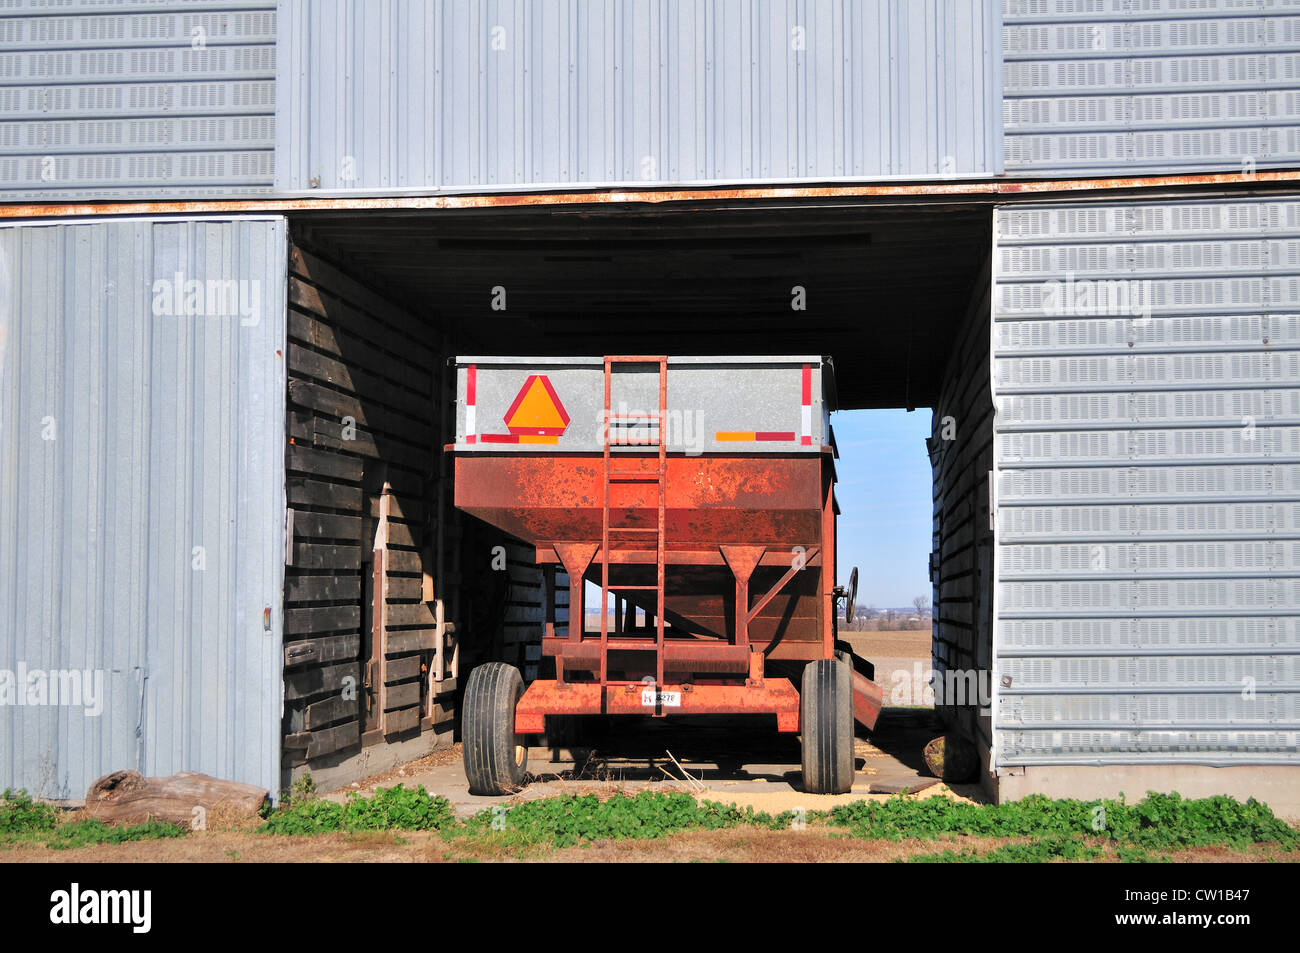 USA Agriculture A crop wagon sits idly in a corrugated steel storage barn in rural northern Illinois. Stock Photo